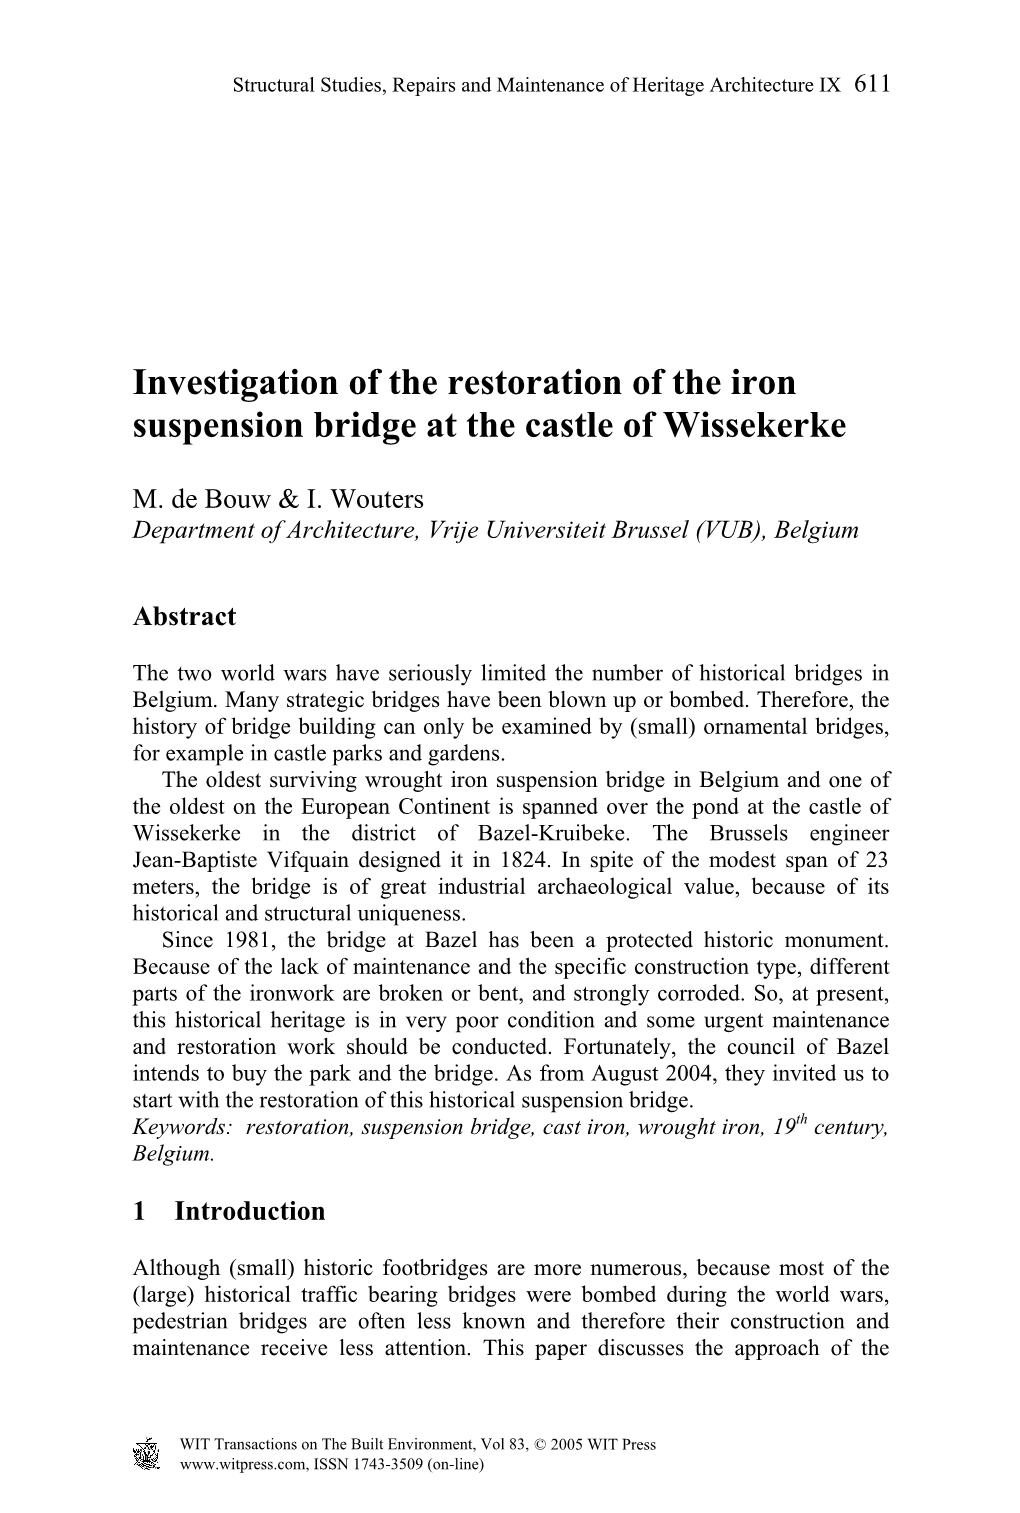 Investigation of the Restoration of the Iron Suspension Bridge at the Castle of Wissekerke